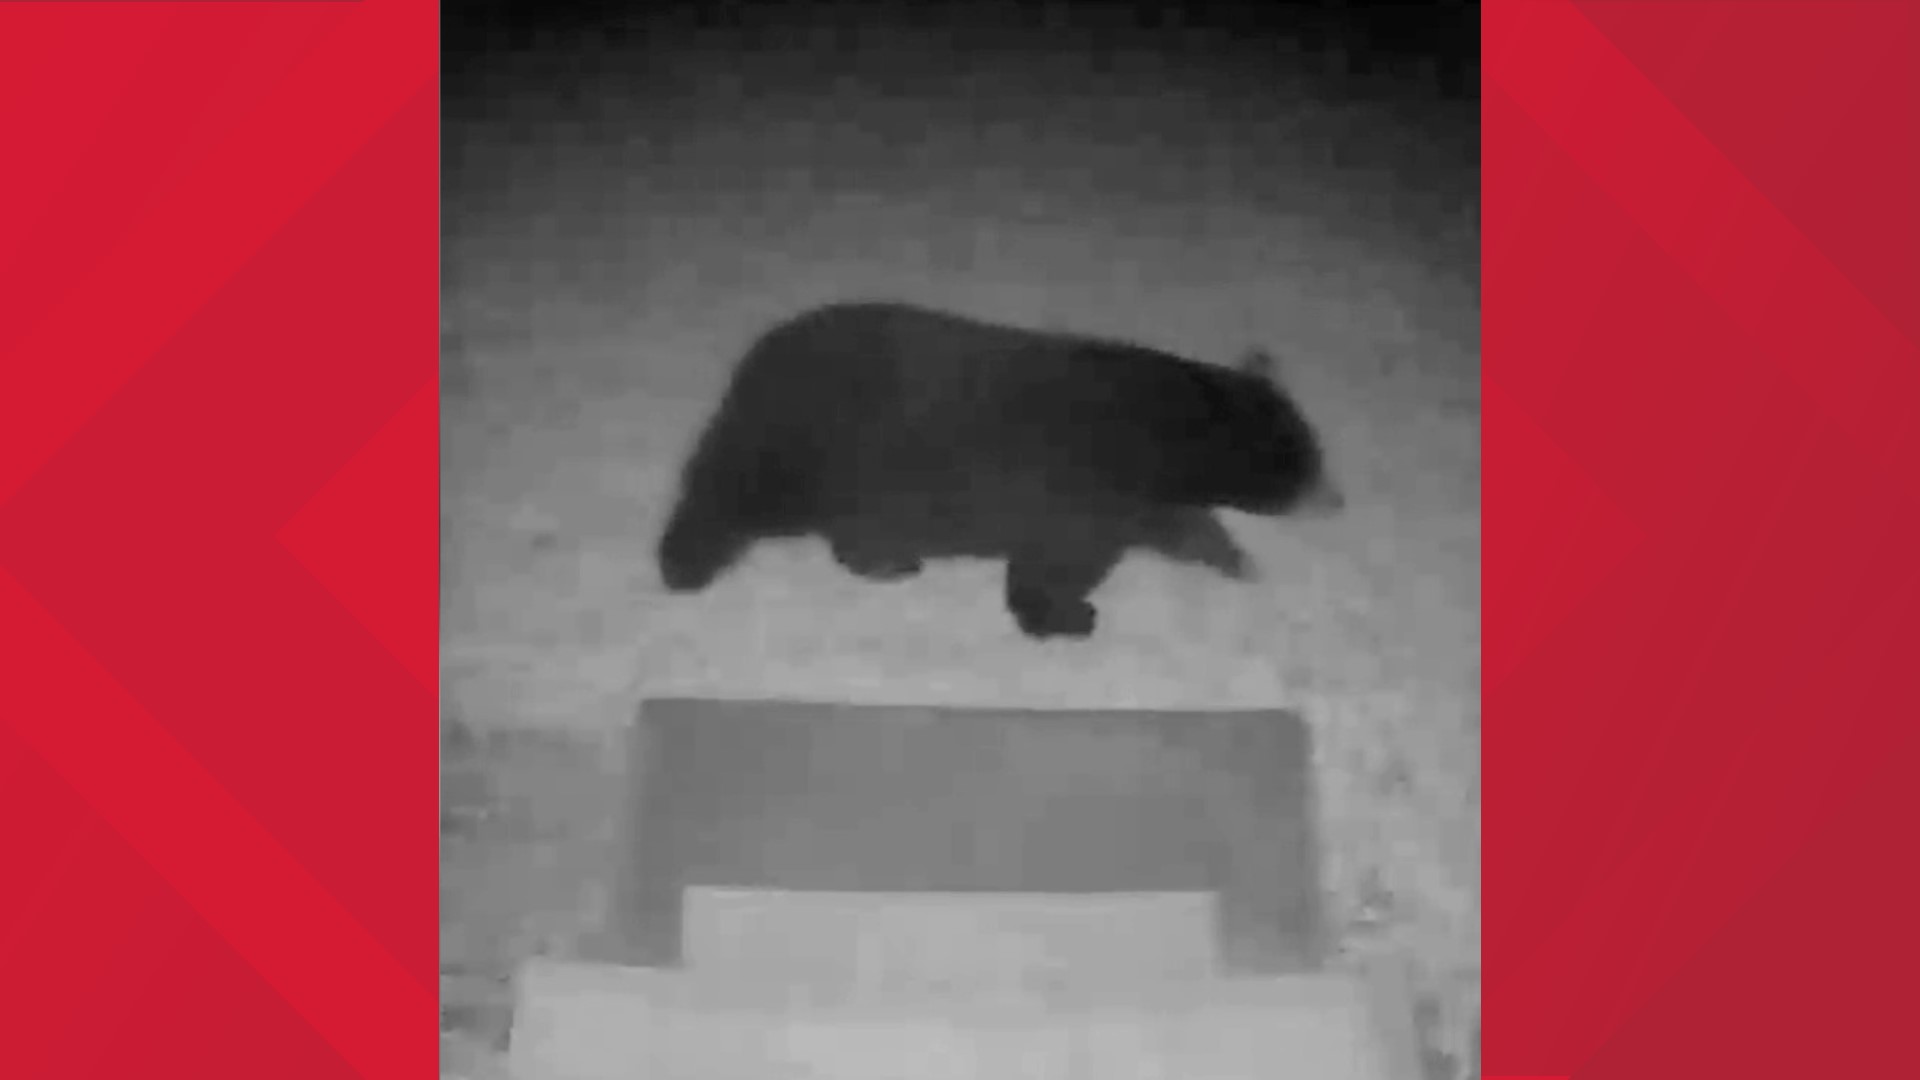 The visiting bruin strolled by the doorbell camera early Monday.